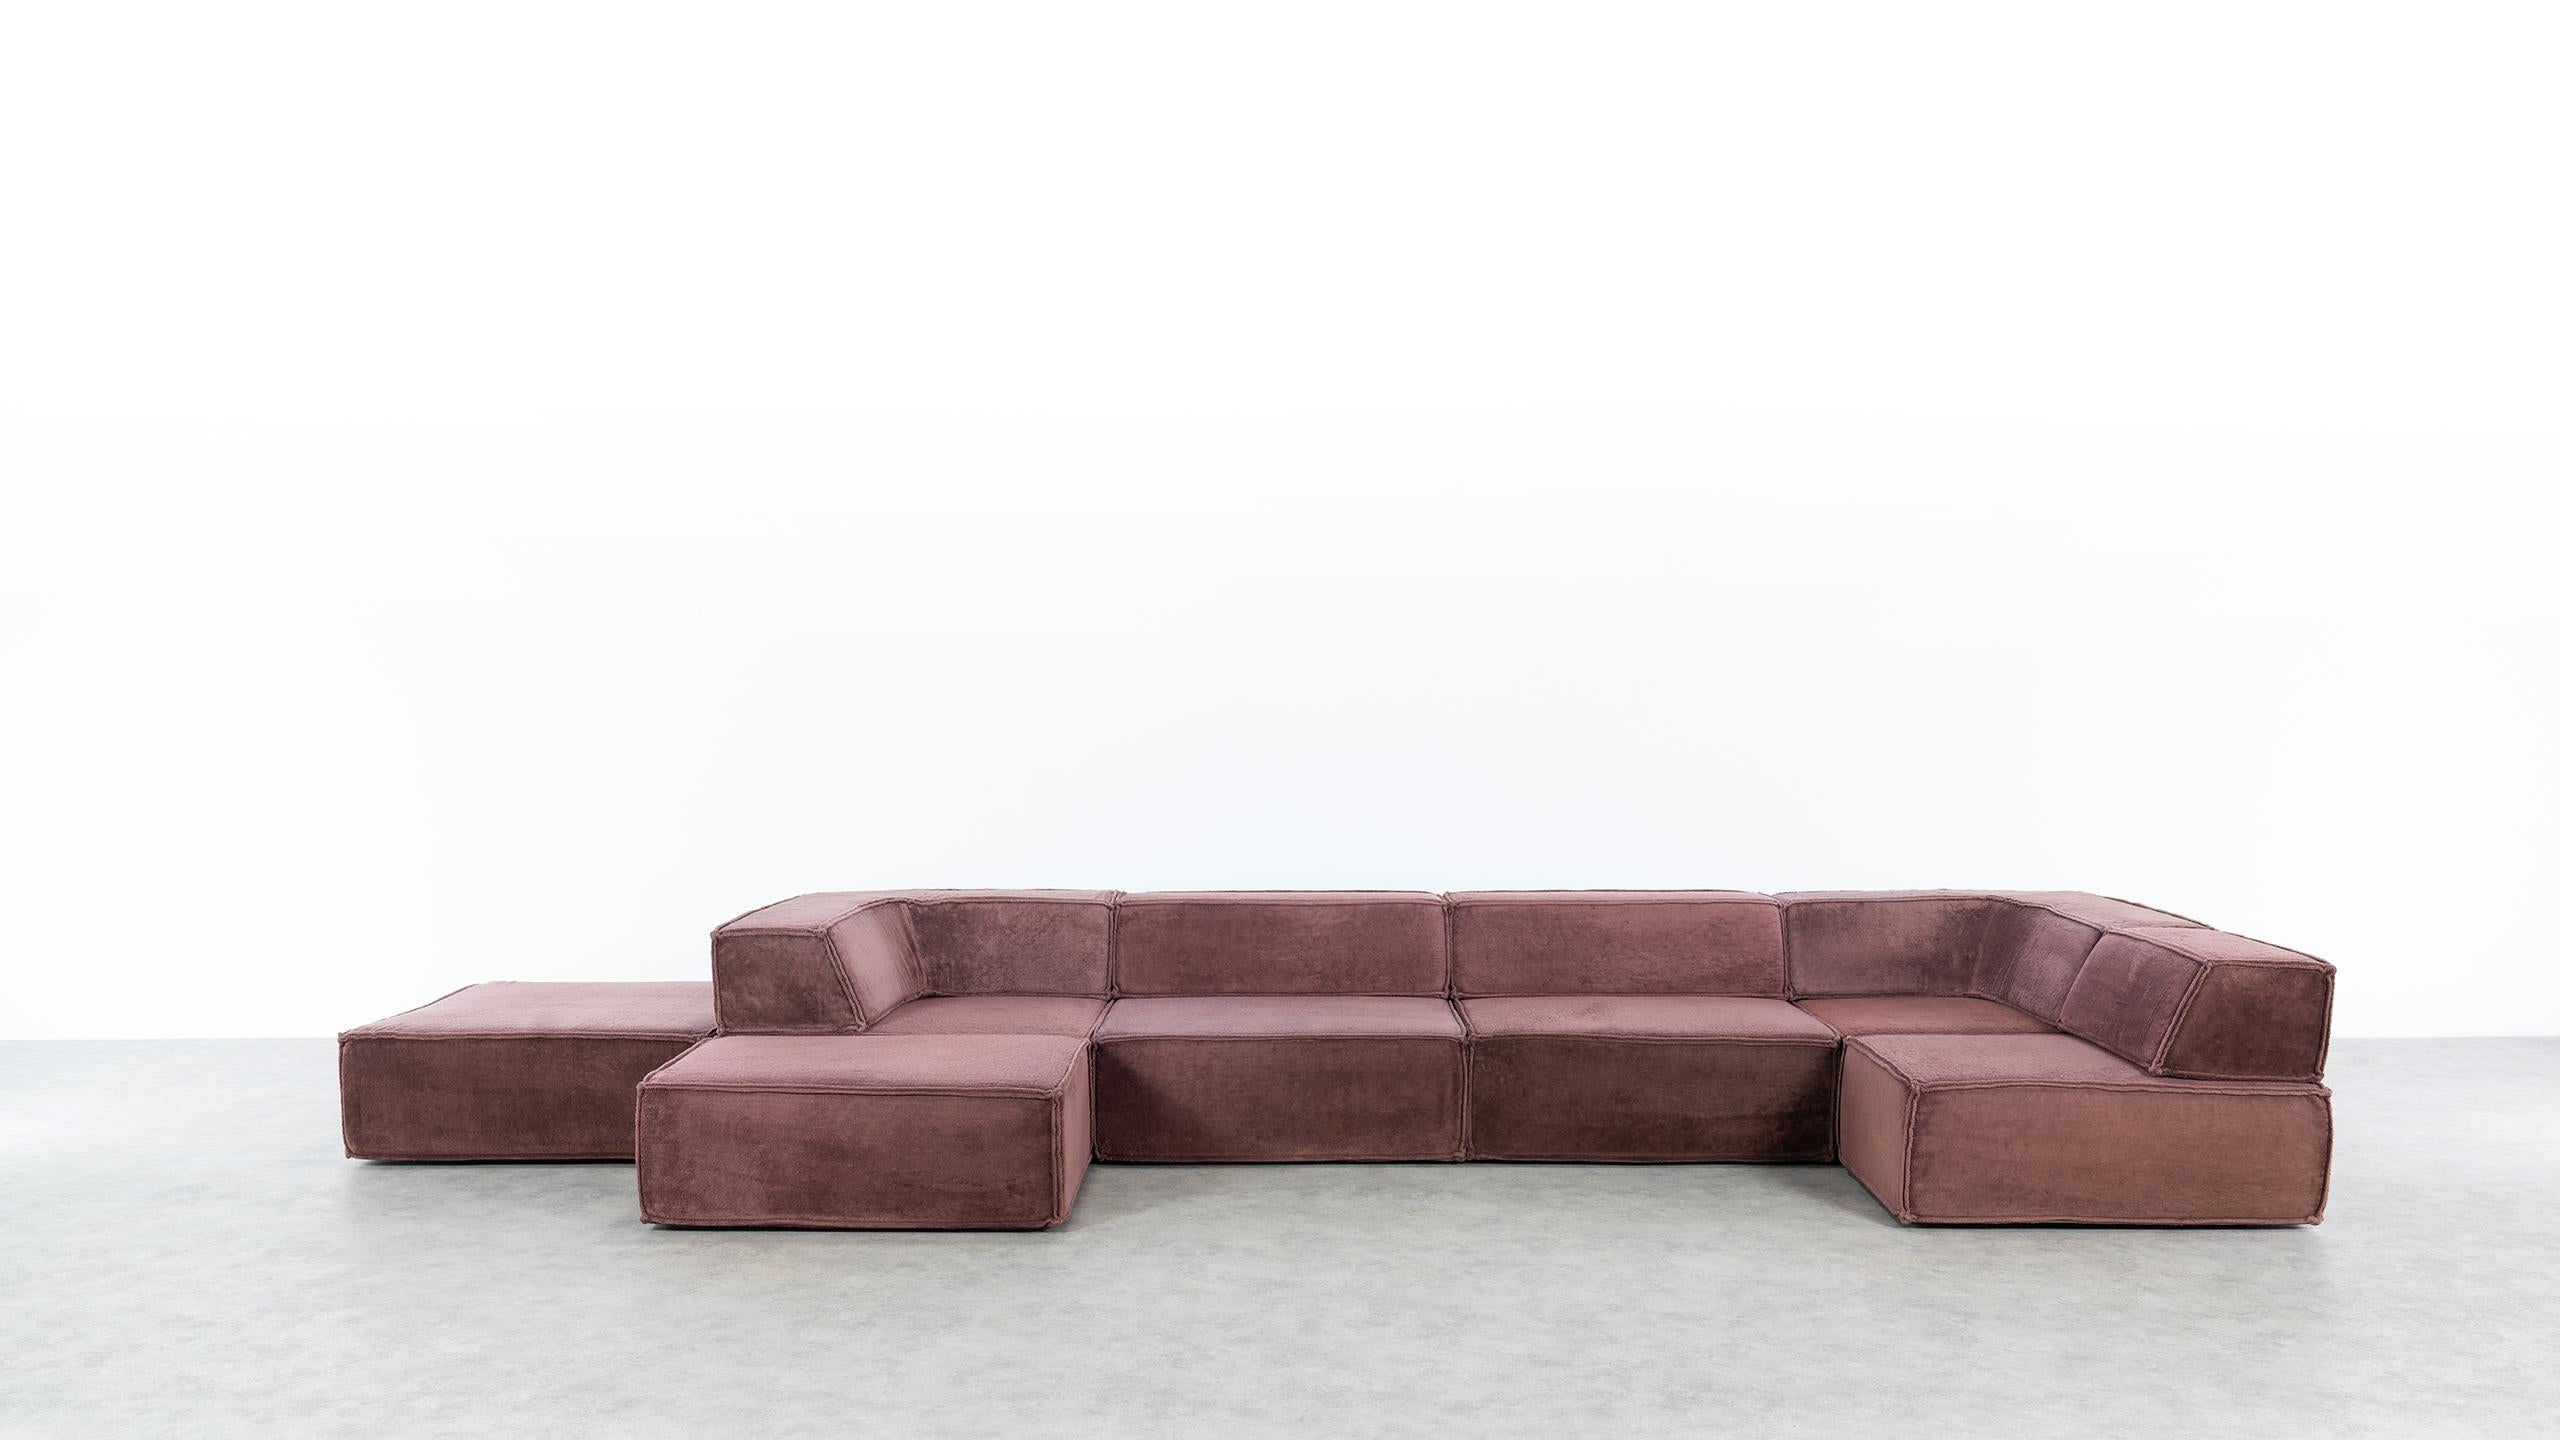 Mid-Century Modern COR Trio Modular Sofa, Giant Landscape in Brown, 1972 by Team Form AG, Swiss